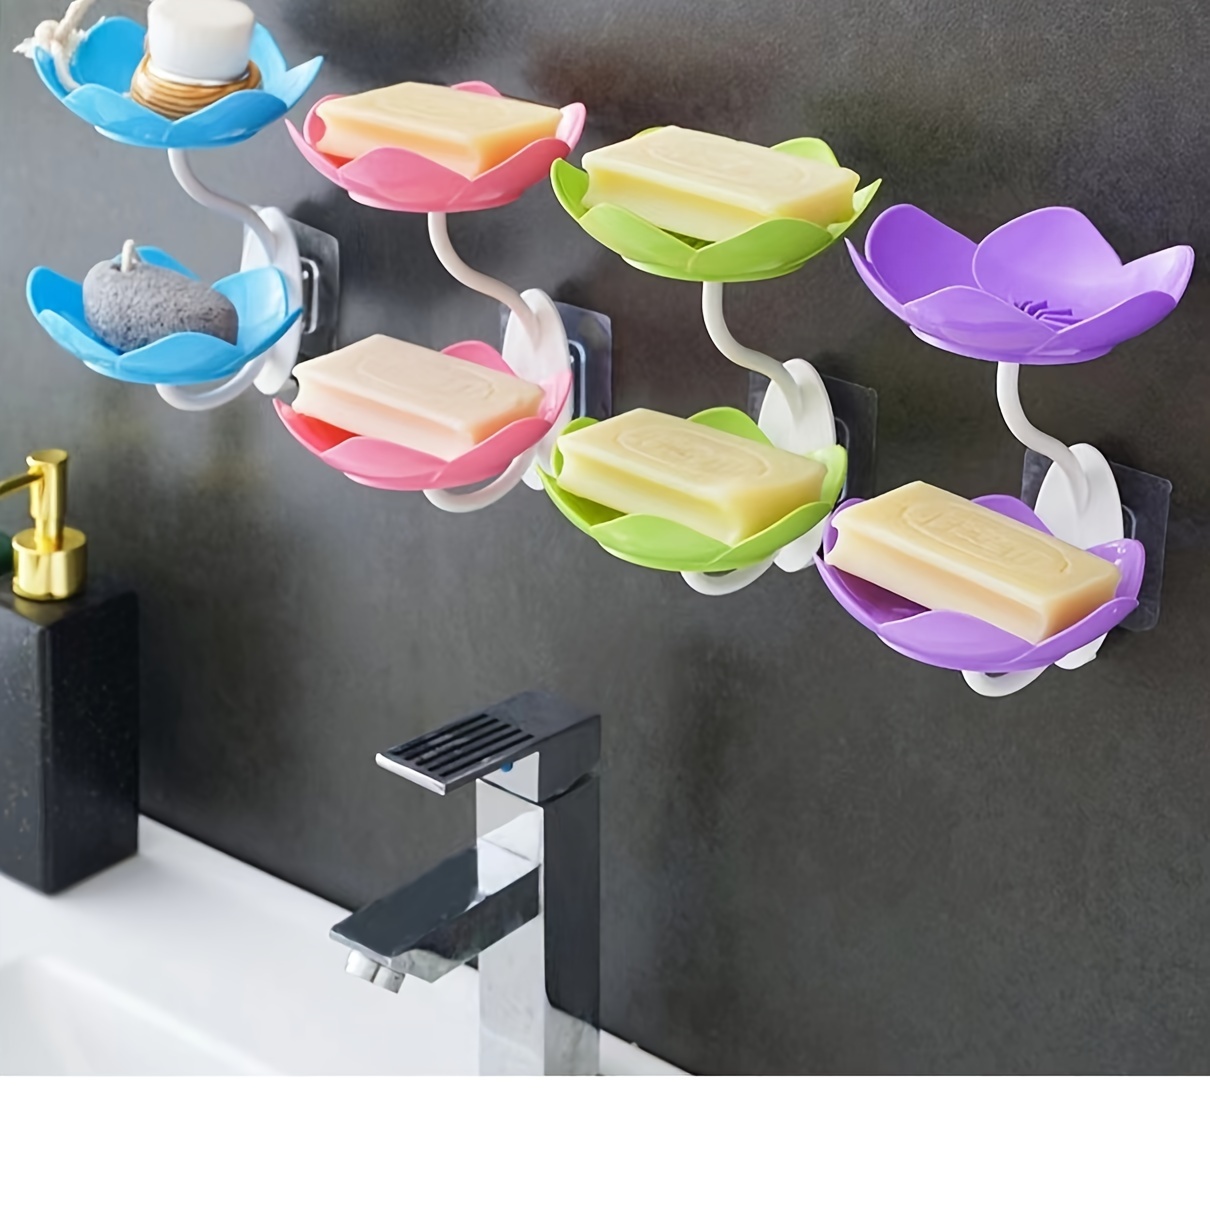 

1pc Lotus Flower Soap Holder, Double Layer No-drill Wall-mounted Soap Dish, Quick Drainage With Hollow Bottom, Multi-color Plastic Bathroom Soap Organizer